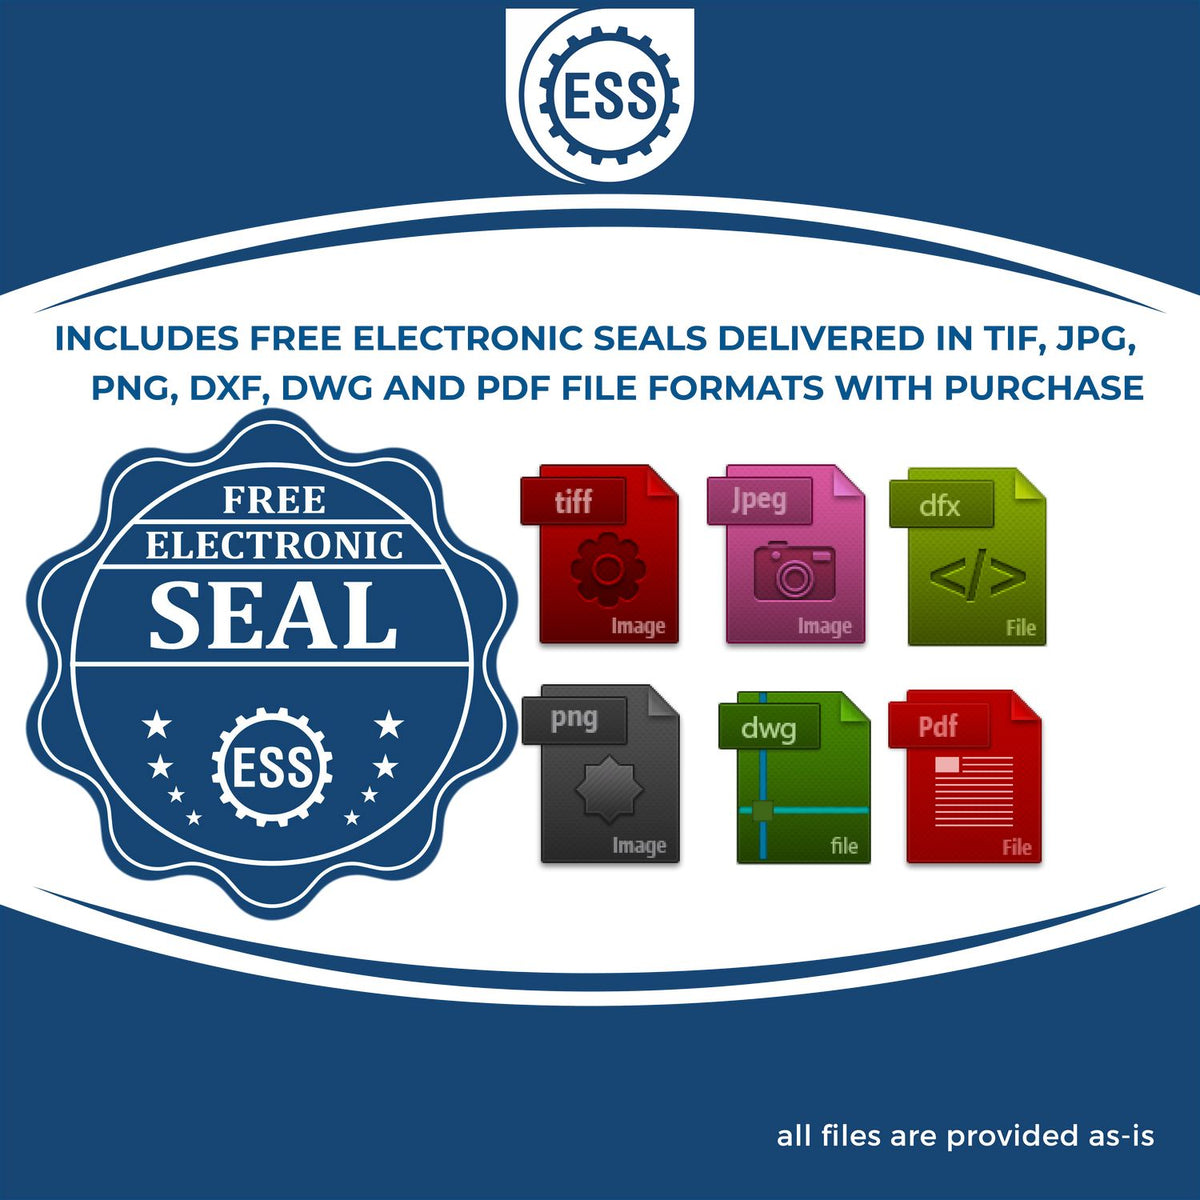 An infographic for the free electronic seal for the Kentucky Professional Engineer Seal Stamp illustrating the different file type icons such as DXF, DWG, TIF, JPG and PNG.